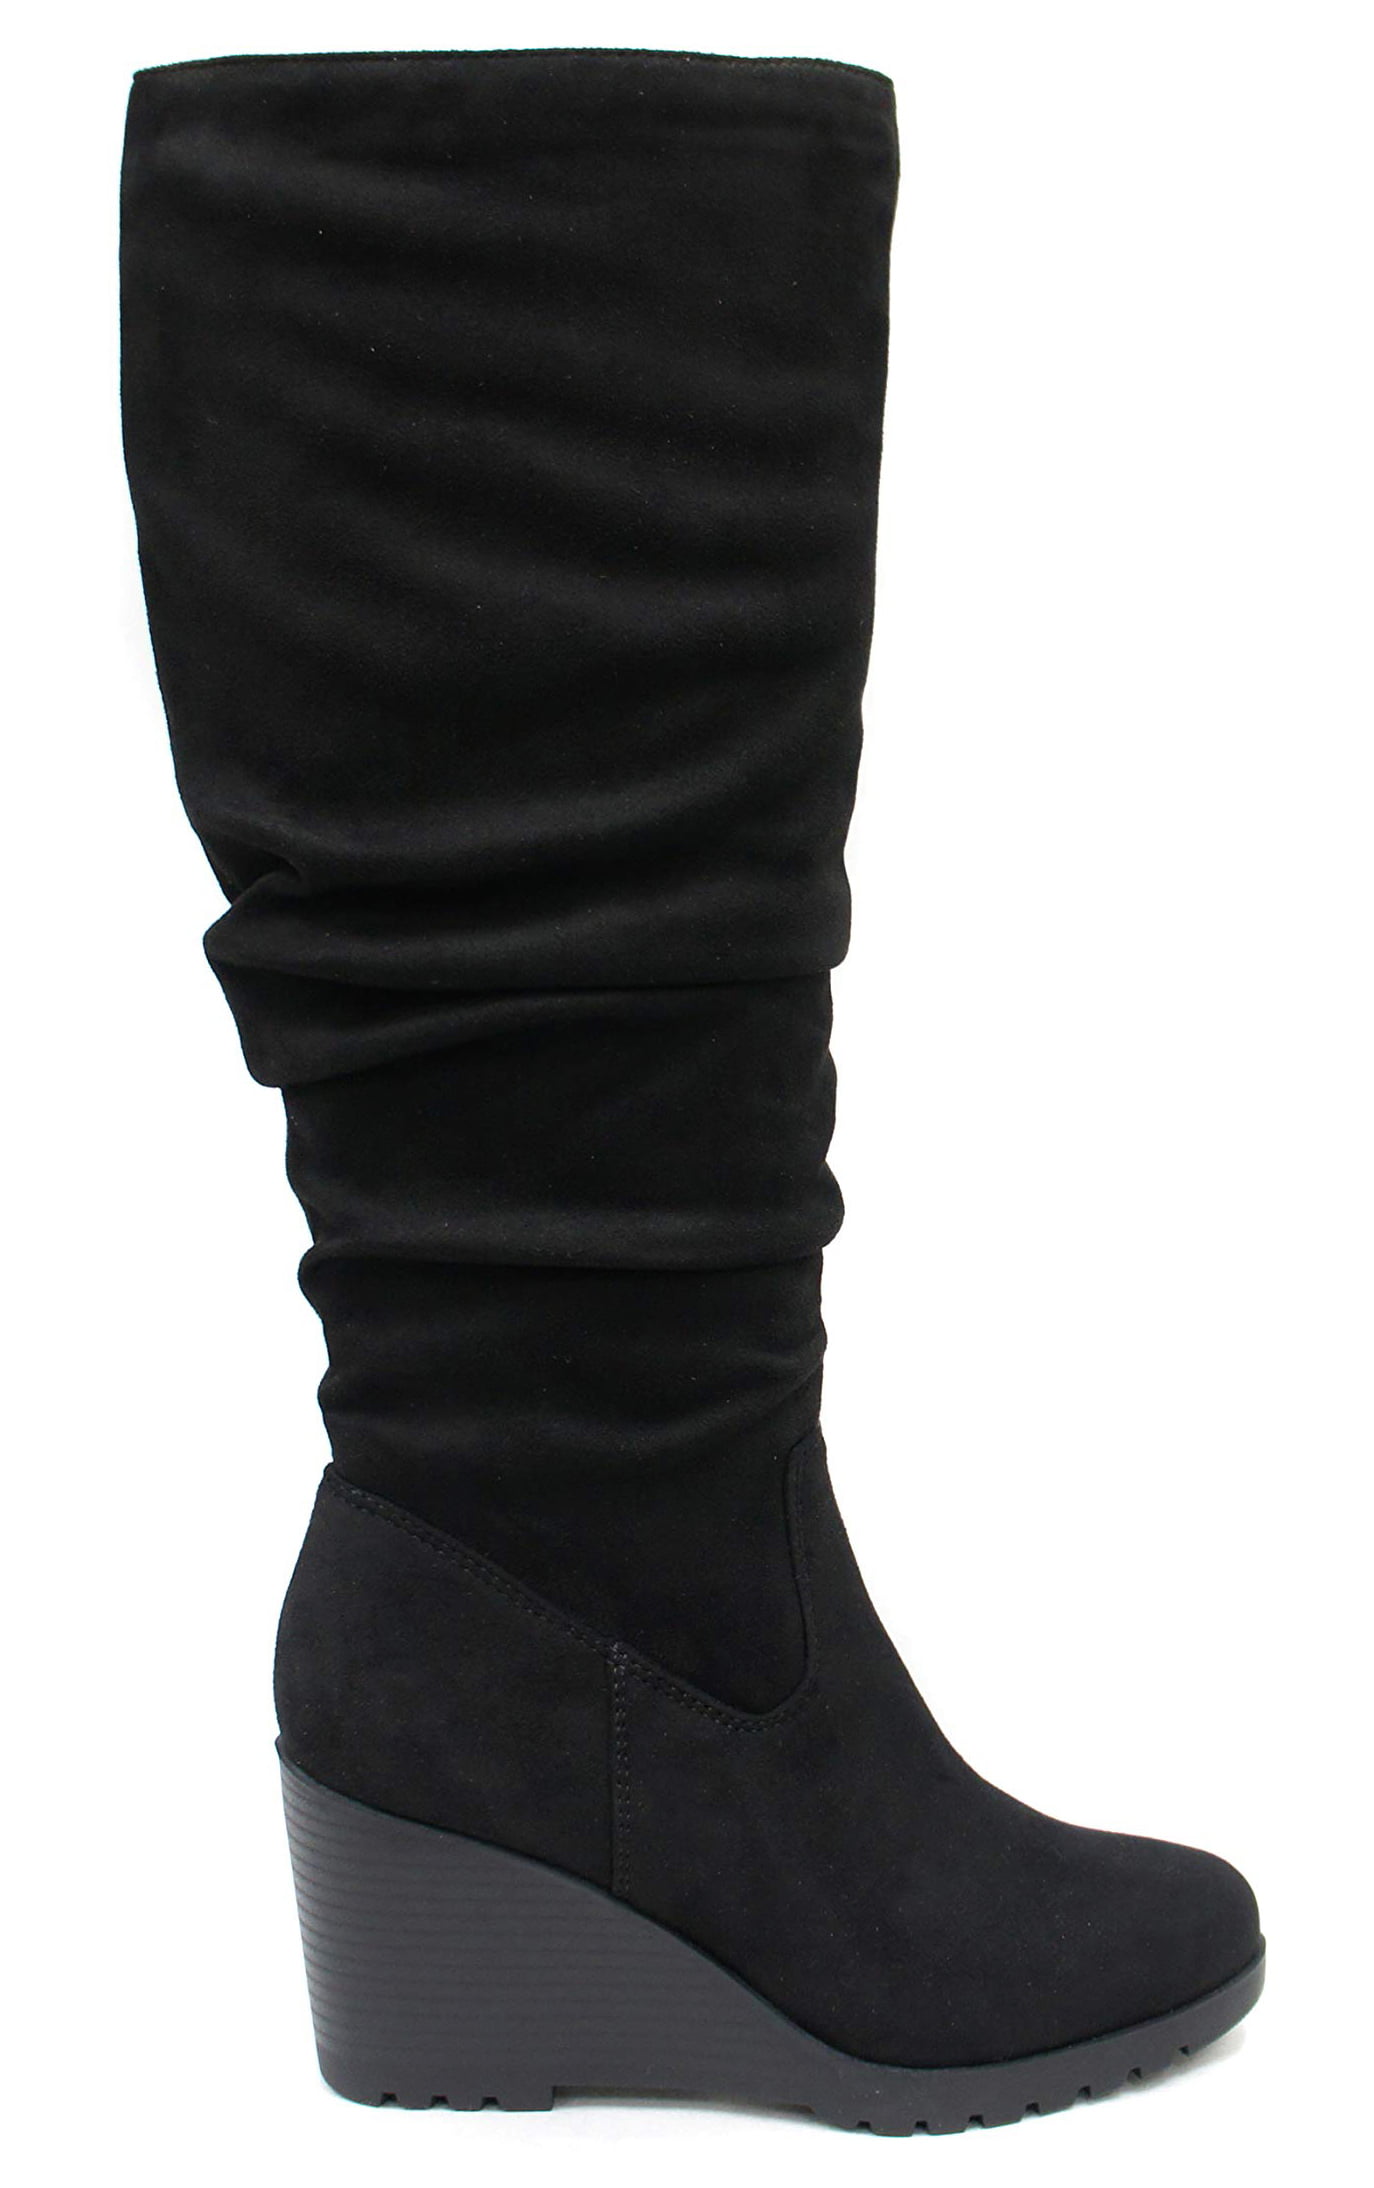 black wedge boots